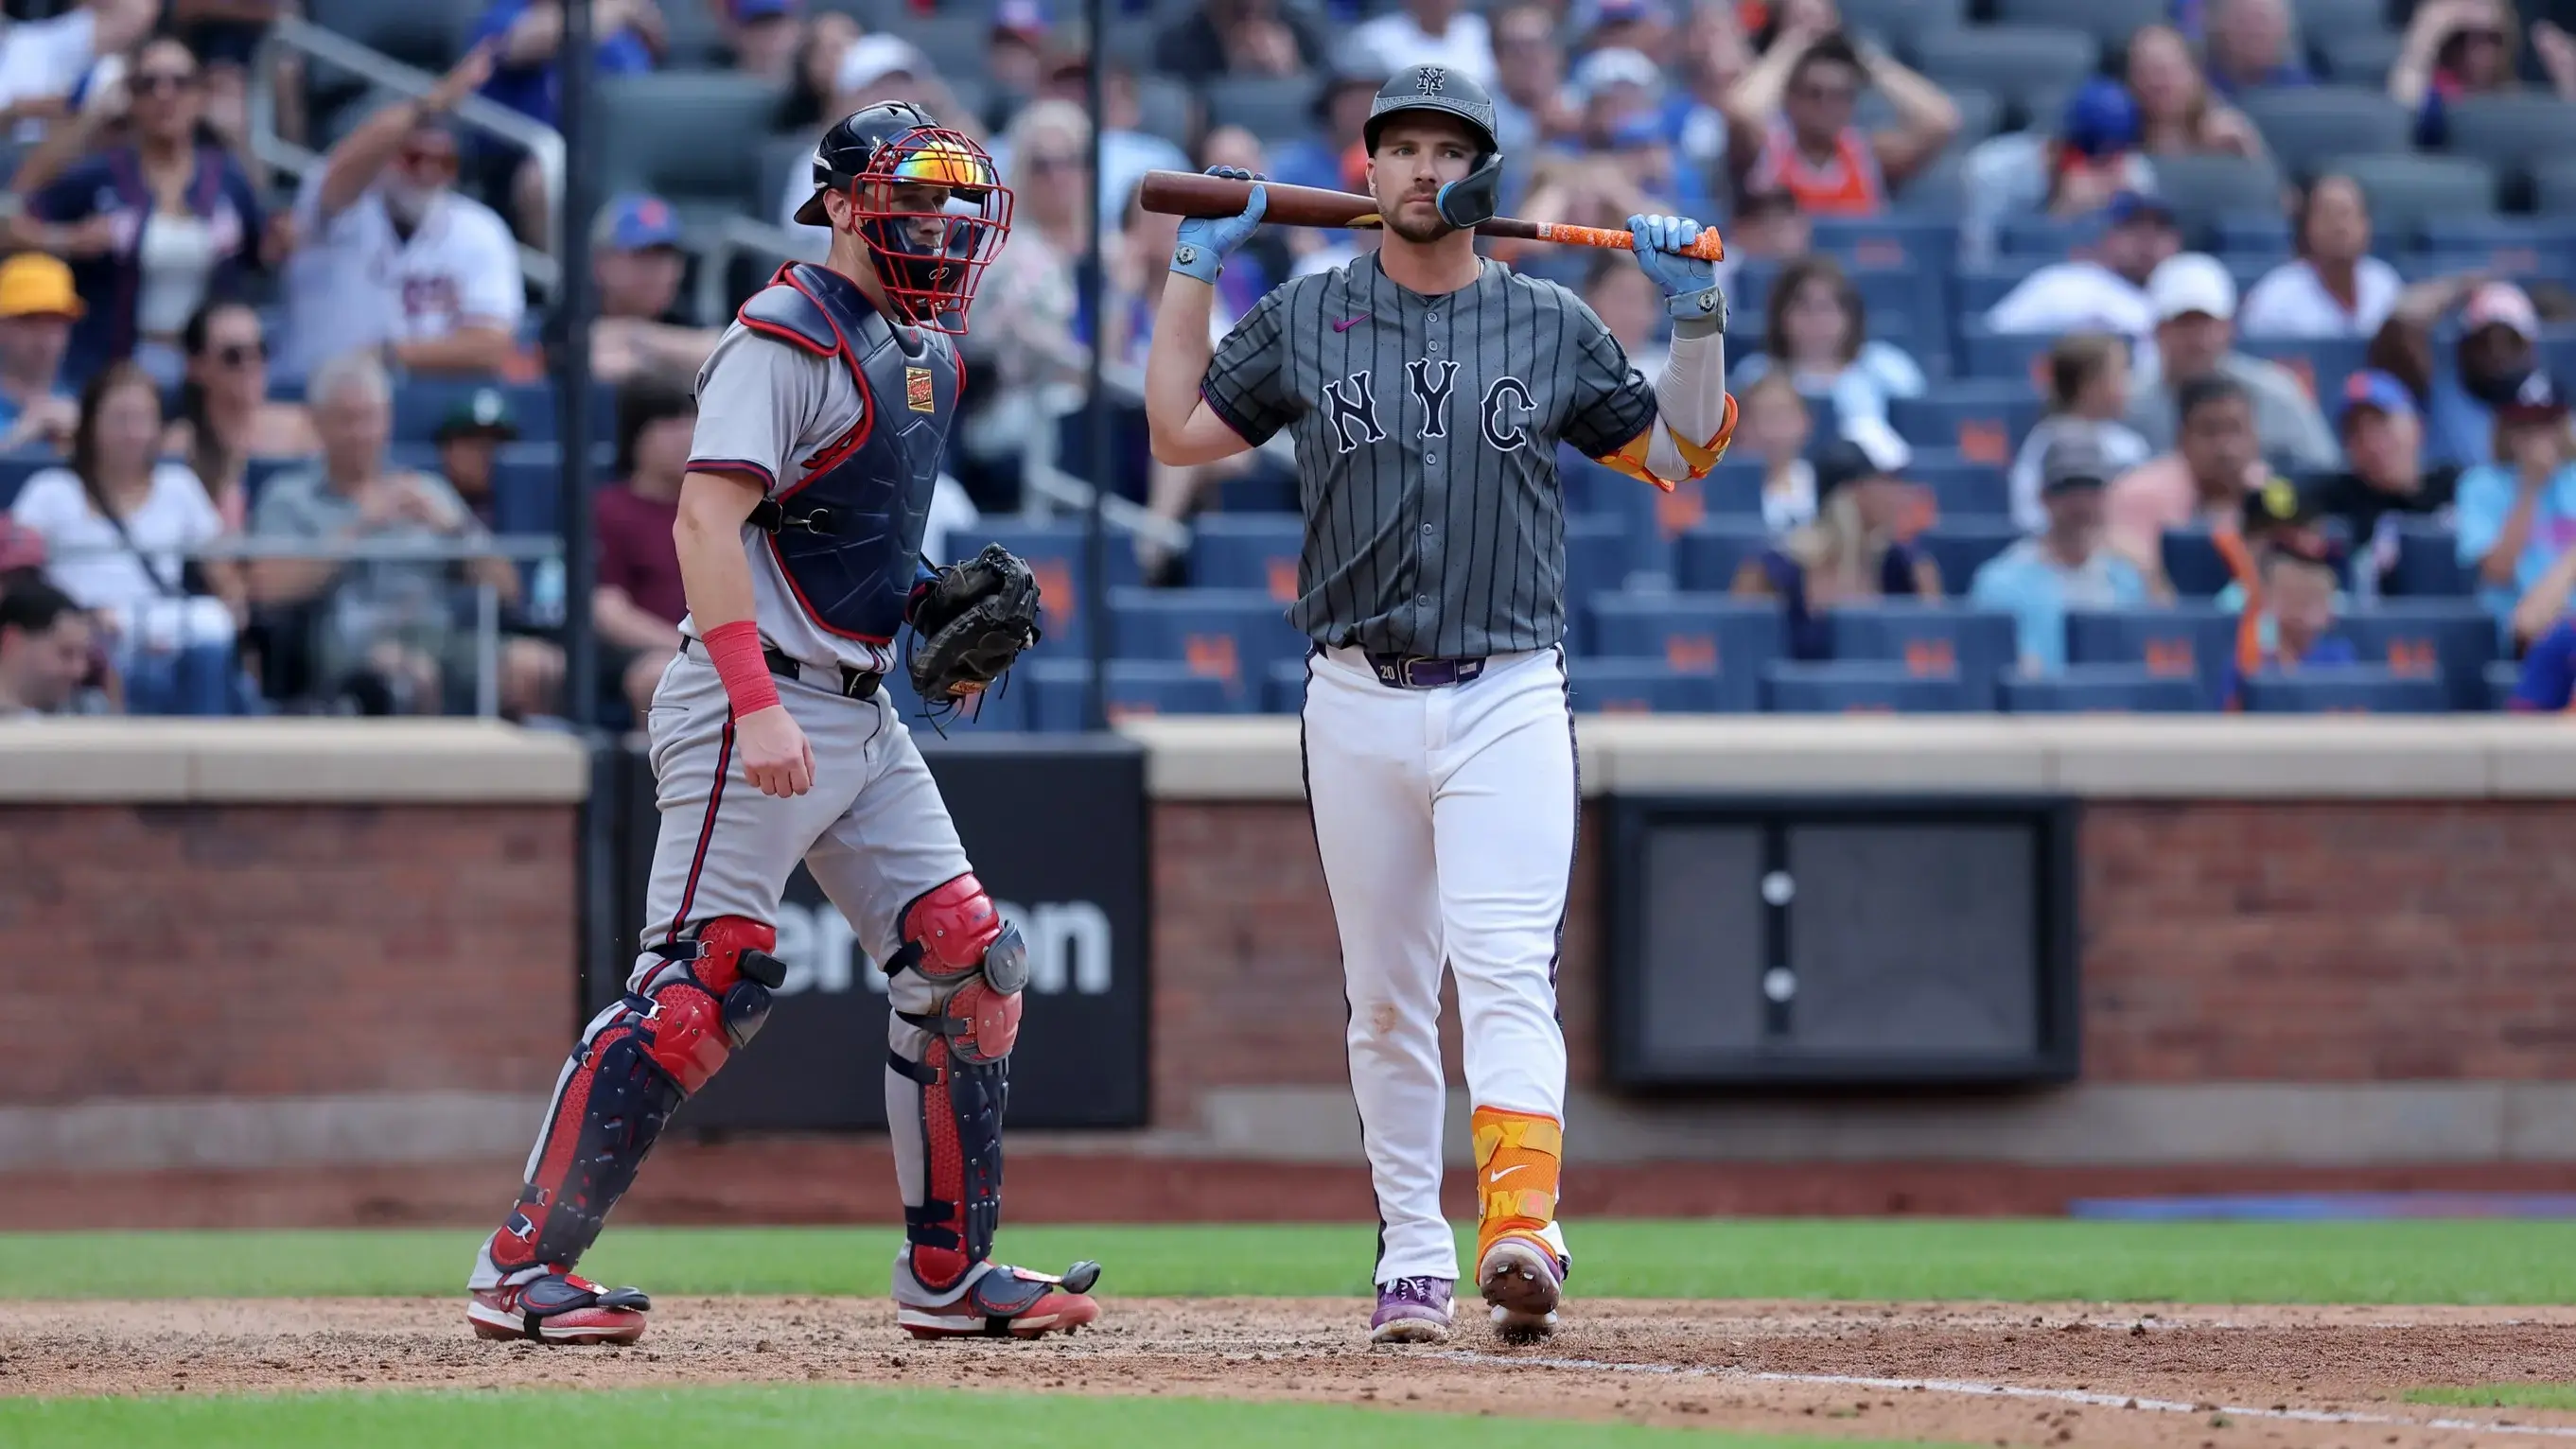 Tylor Megill allows three home runs, Mets offense shut out in 4-0 loss to Braves